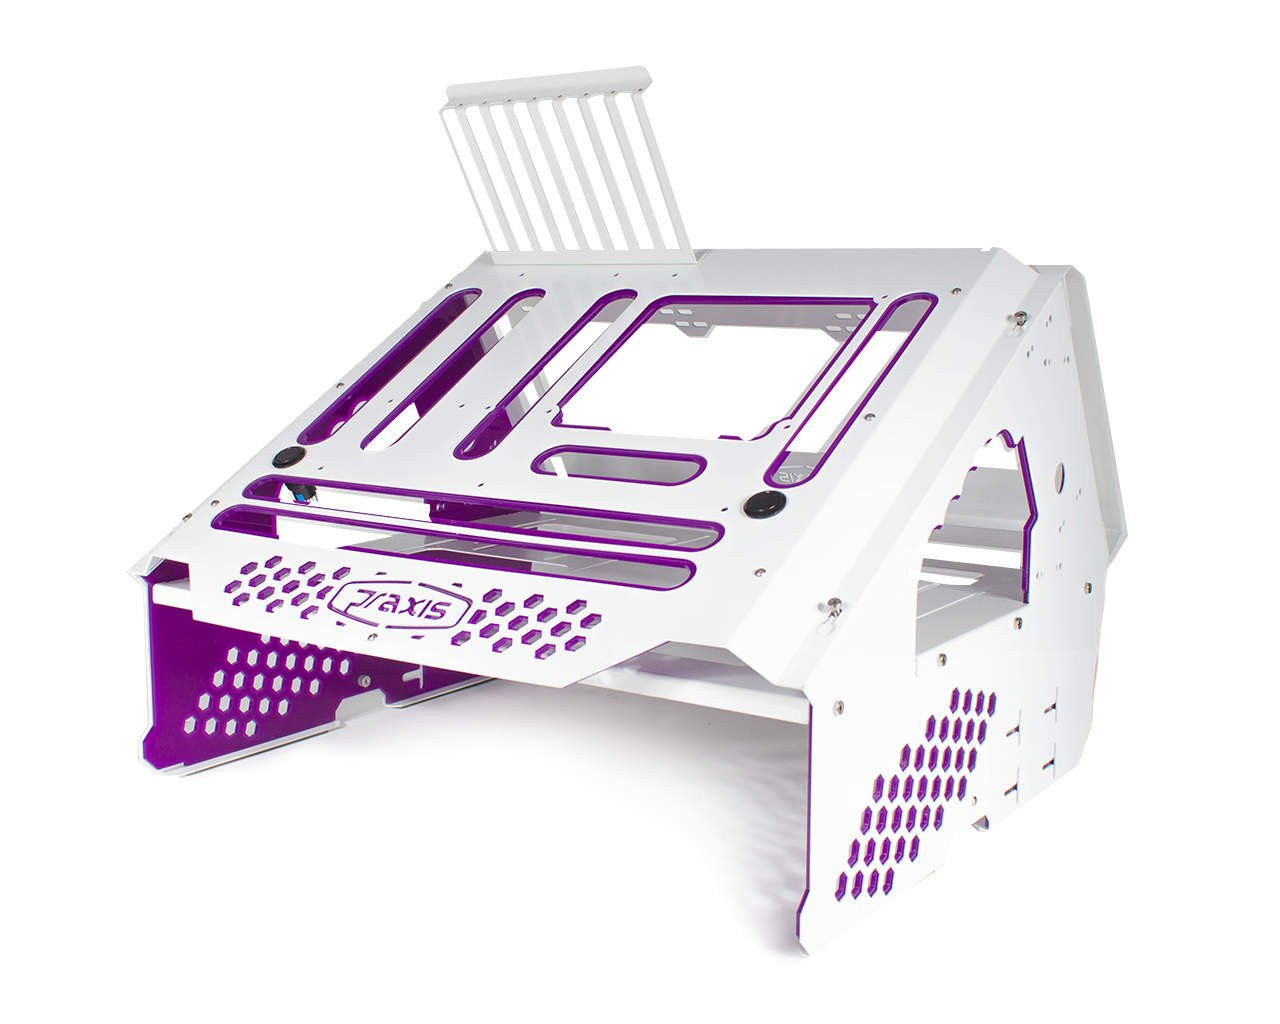 PrimoChill's Praxis Wetbench Powdercoated Steel Modular Open Air Computer Test Bench for Watercooling or Air Cooled Components - PrimoChill - KEEPING IT COOL White w/Solid Purple Accents